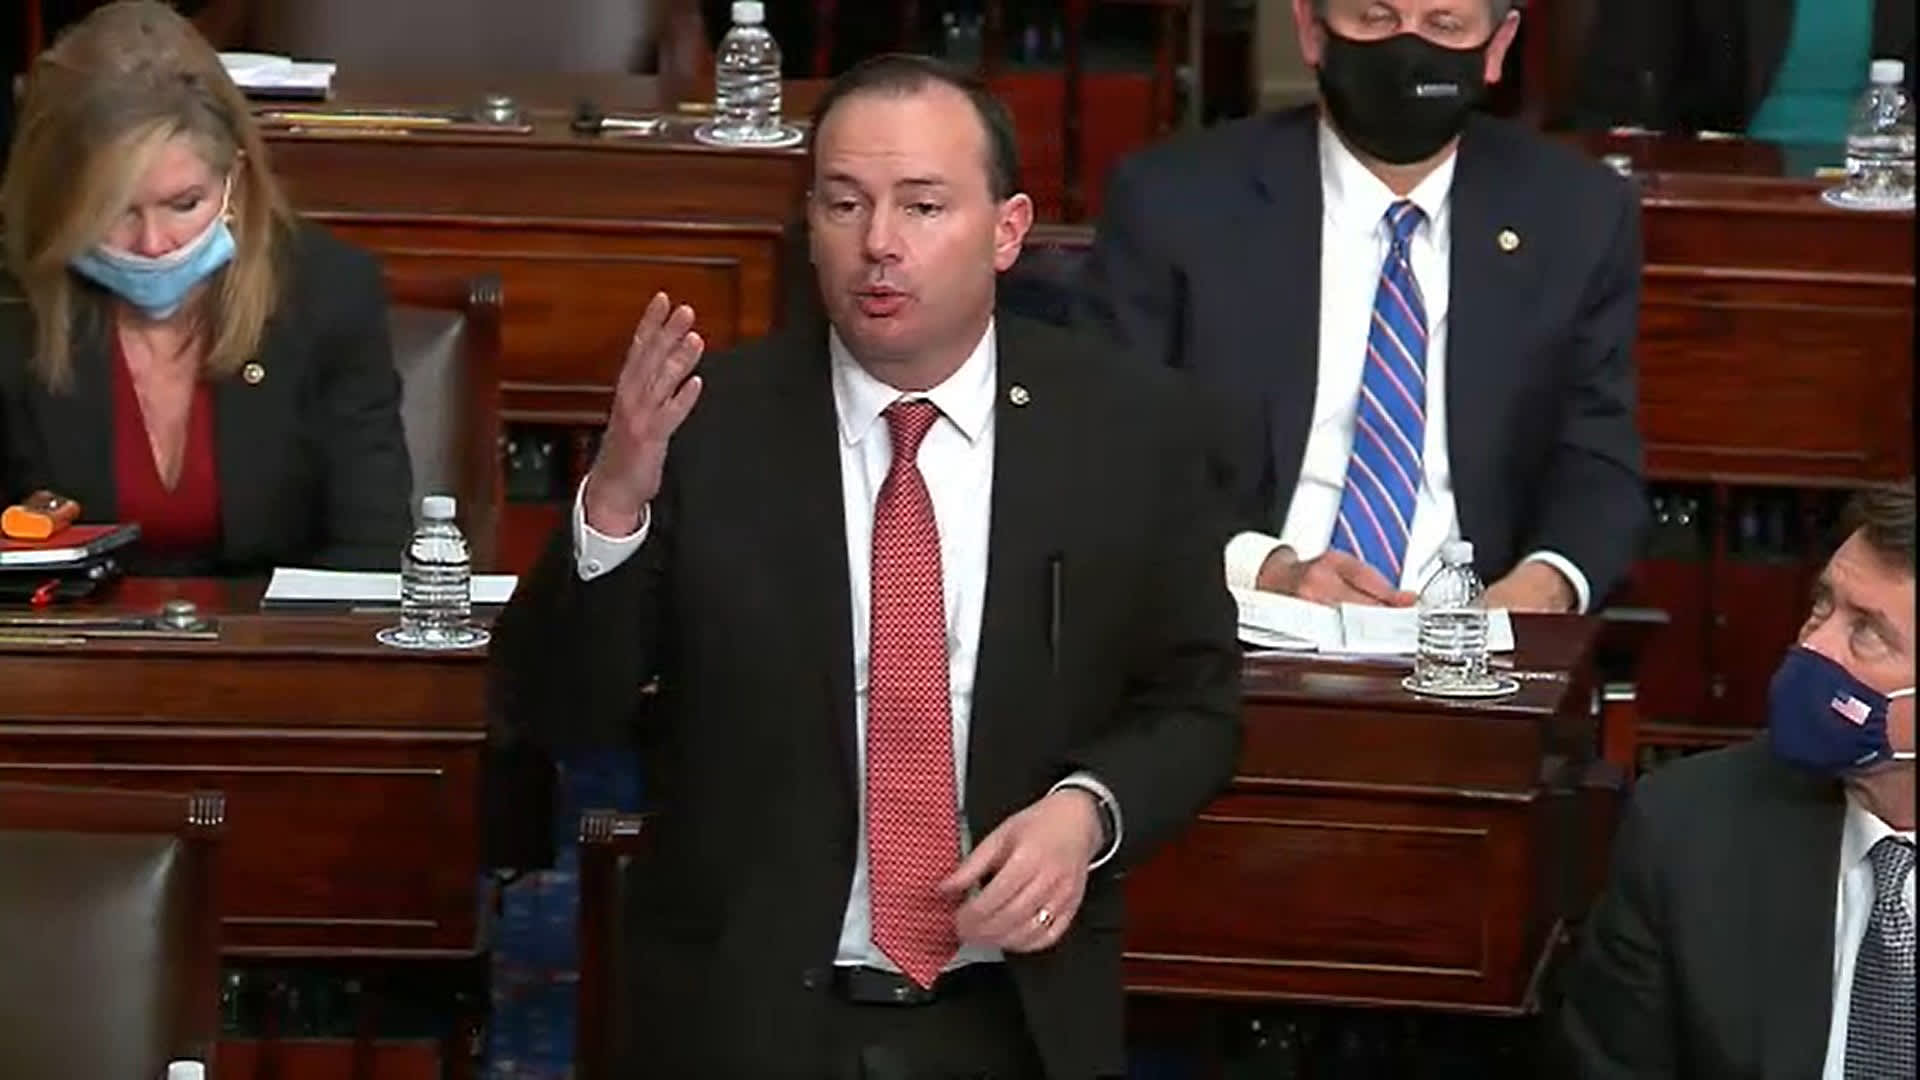 Sen. Mike Lee (R-UT) objects to House Impeachment managers using a telephone call Lee reportedly fielded from President Donald Trump on the day of the January 6 attack on the Capitol Building, on the second day of Trump's second impeachment trial at the U.S. Capitol on February 10, 2021 in Washington, DC.